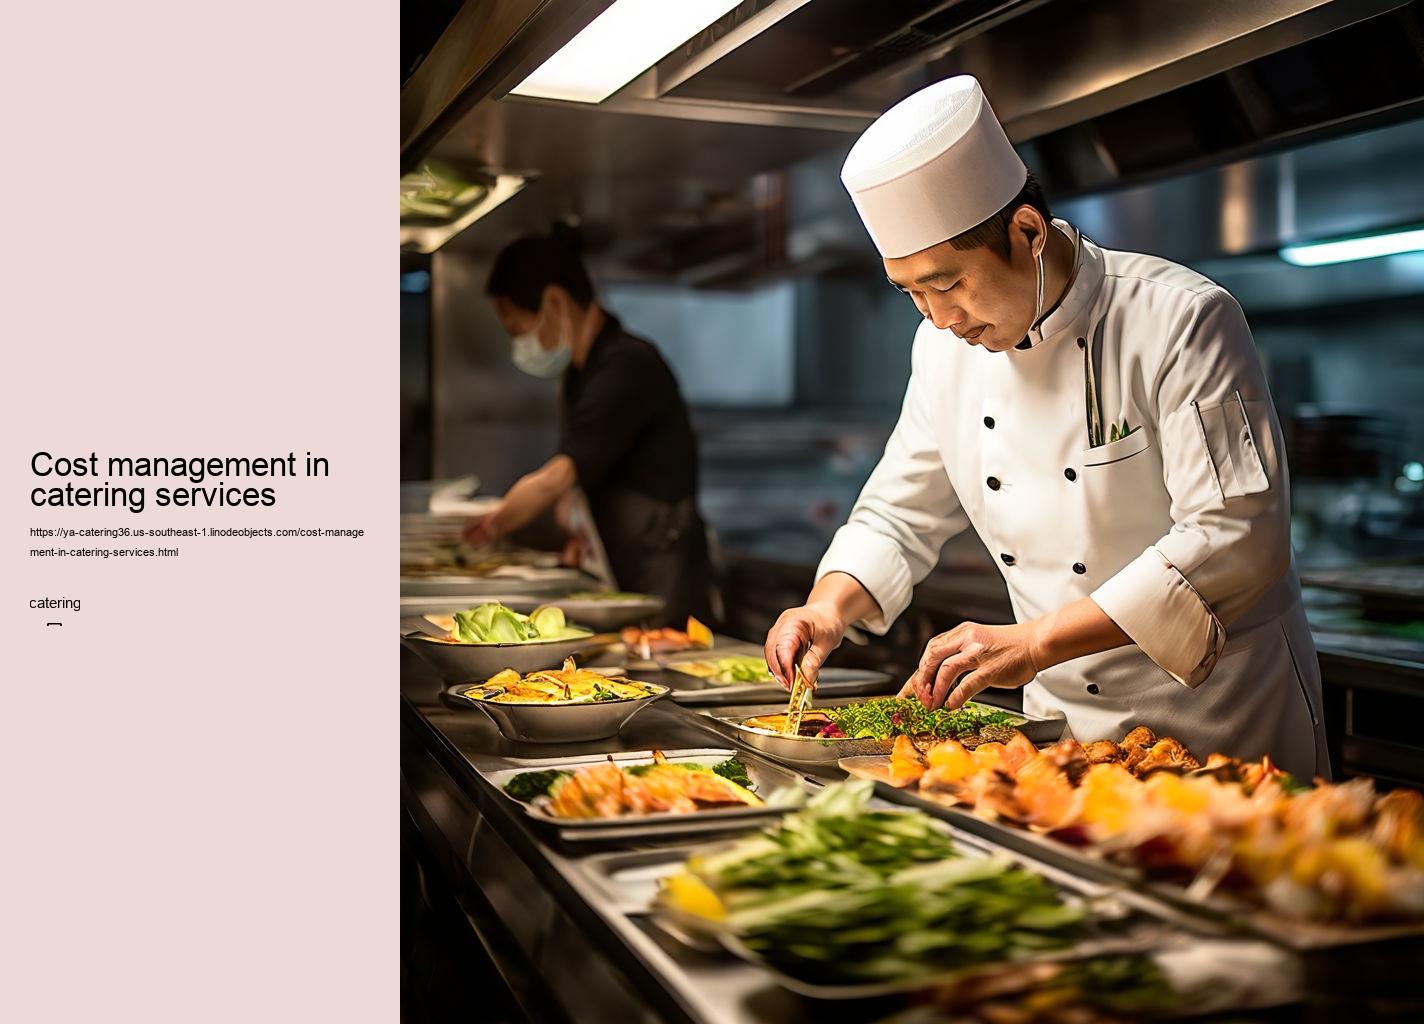 Cost management in catering services